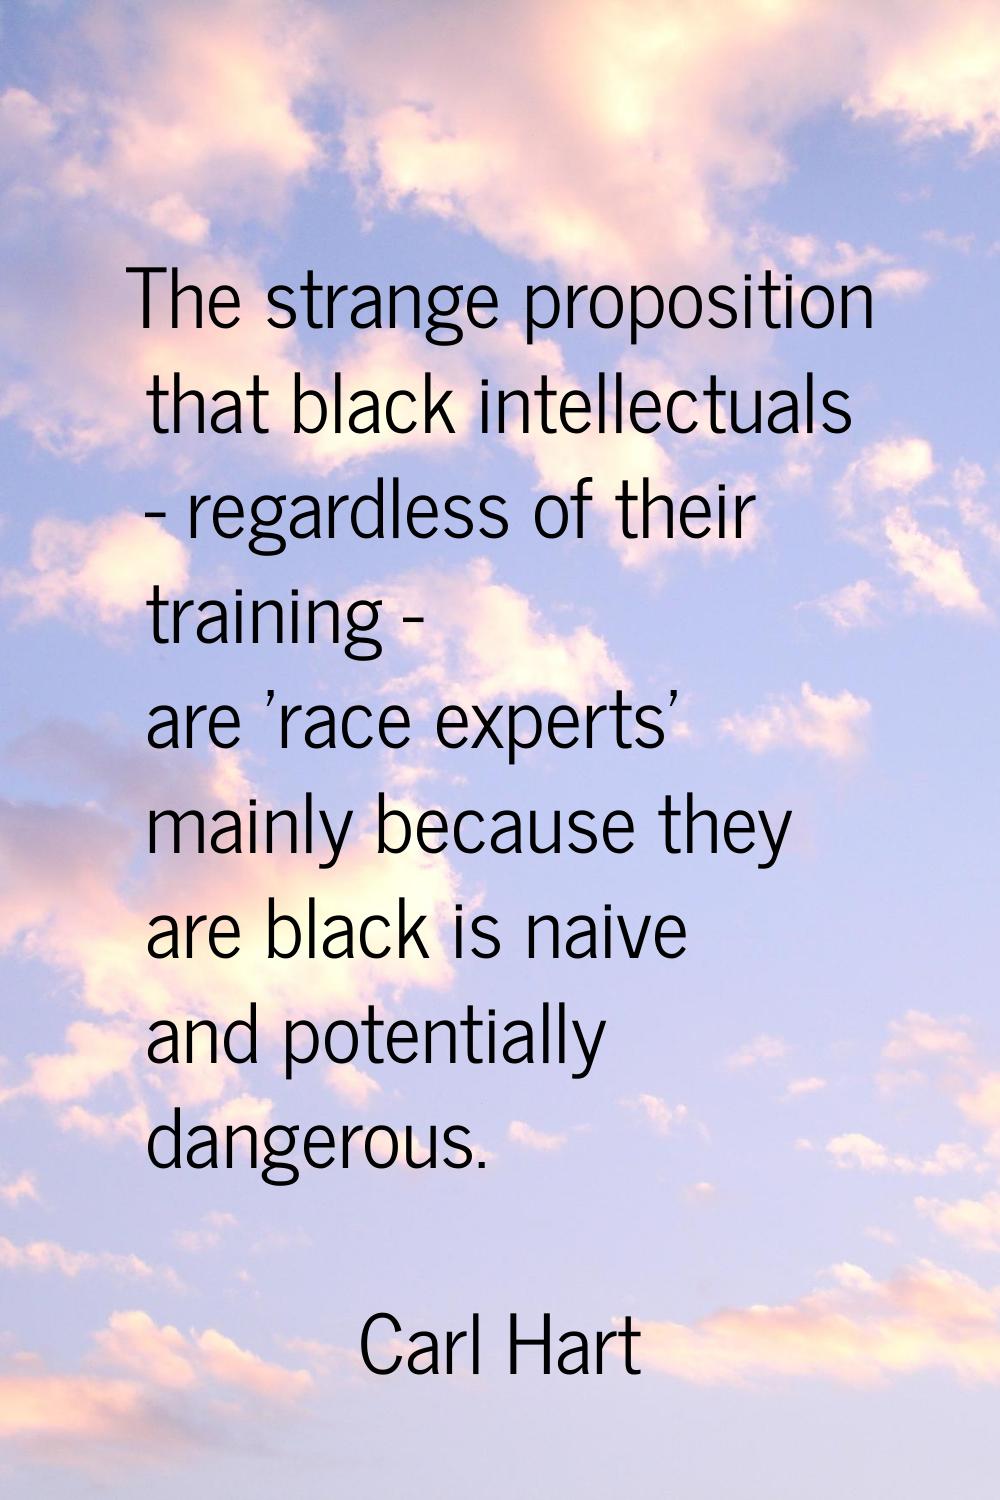 The strange proposition that black intellectuals - regardless of their training - are 'race experts